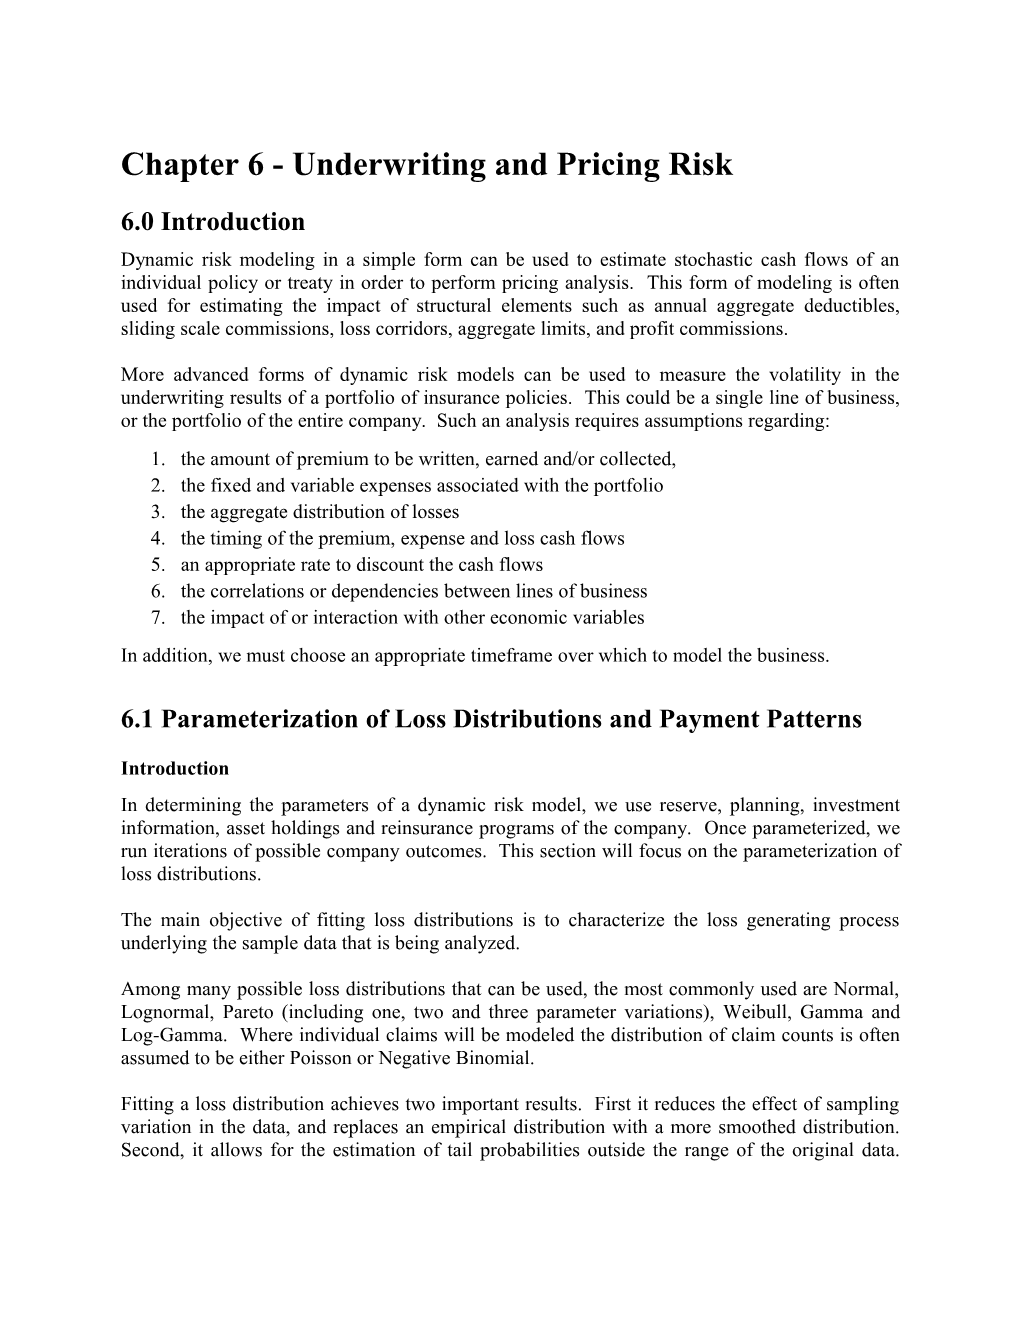 Chapter 6 - Underwriting and Pricing Risk